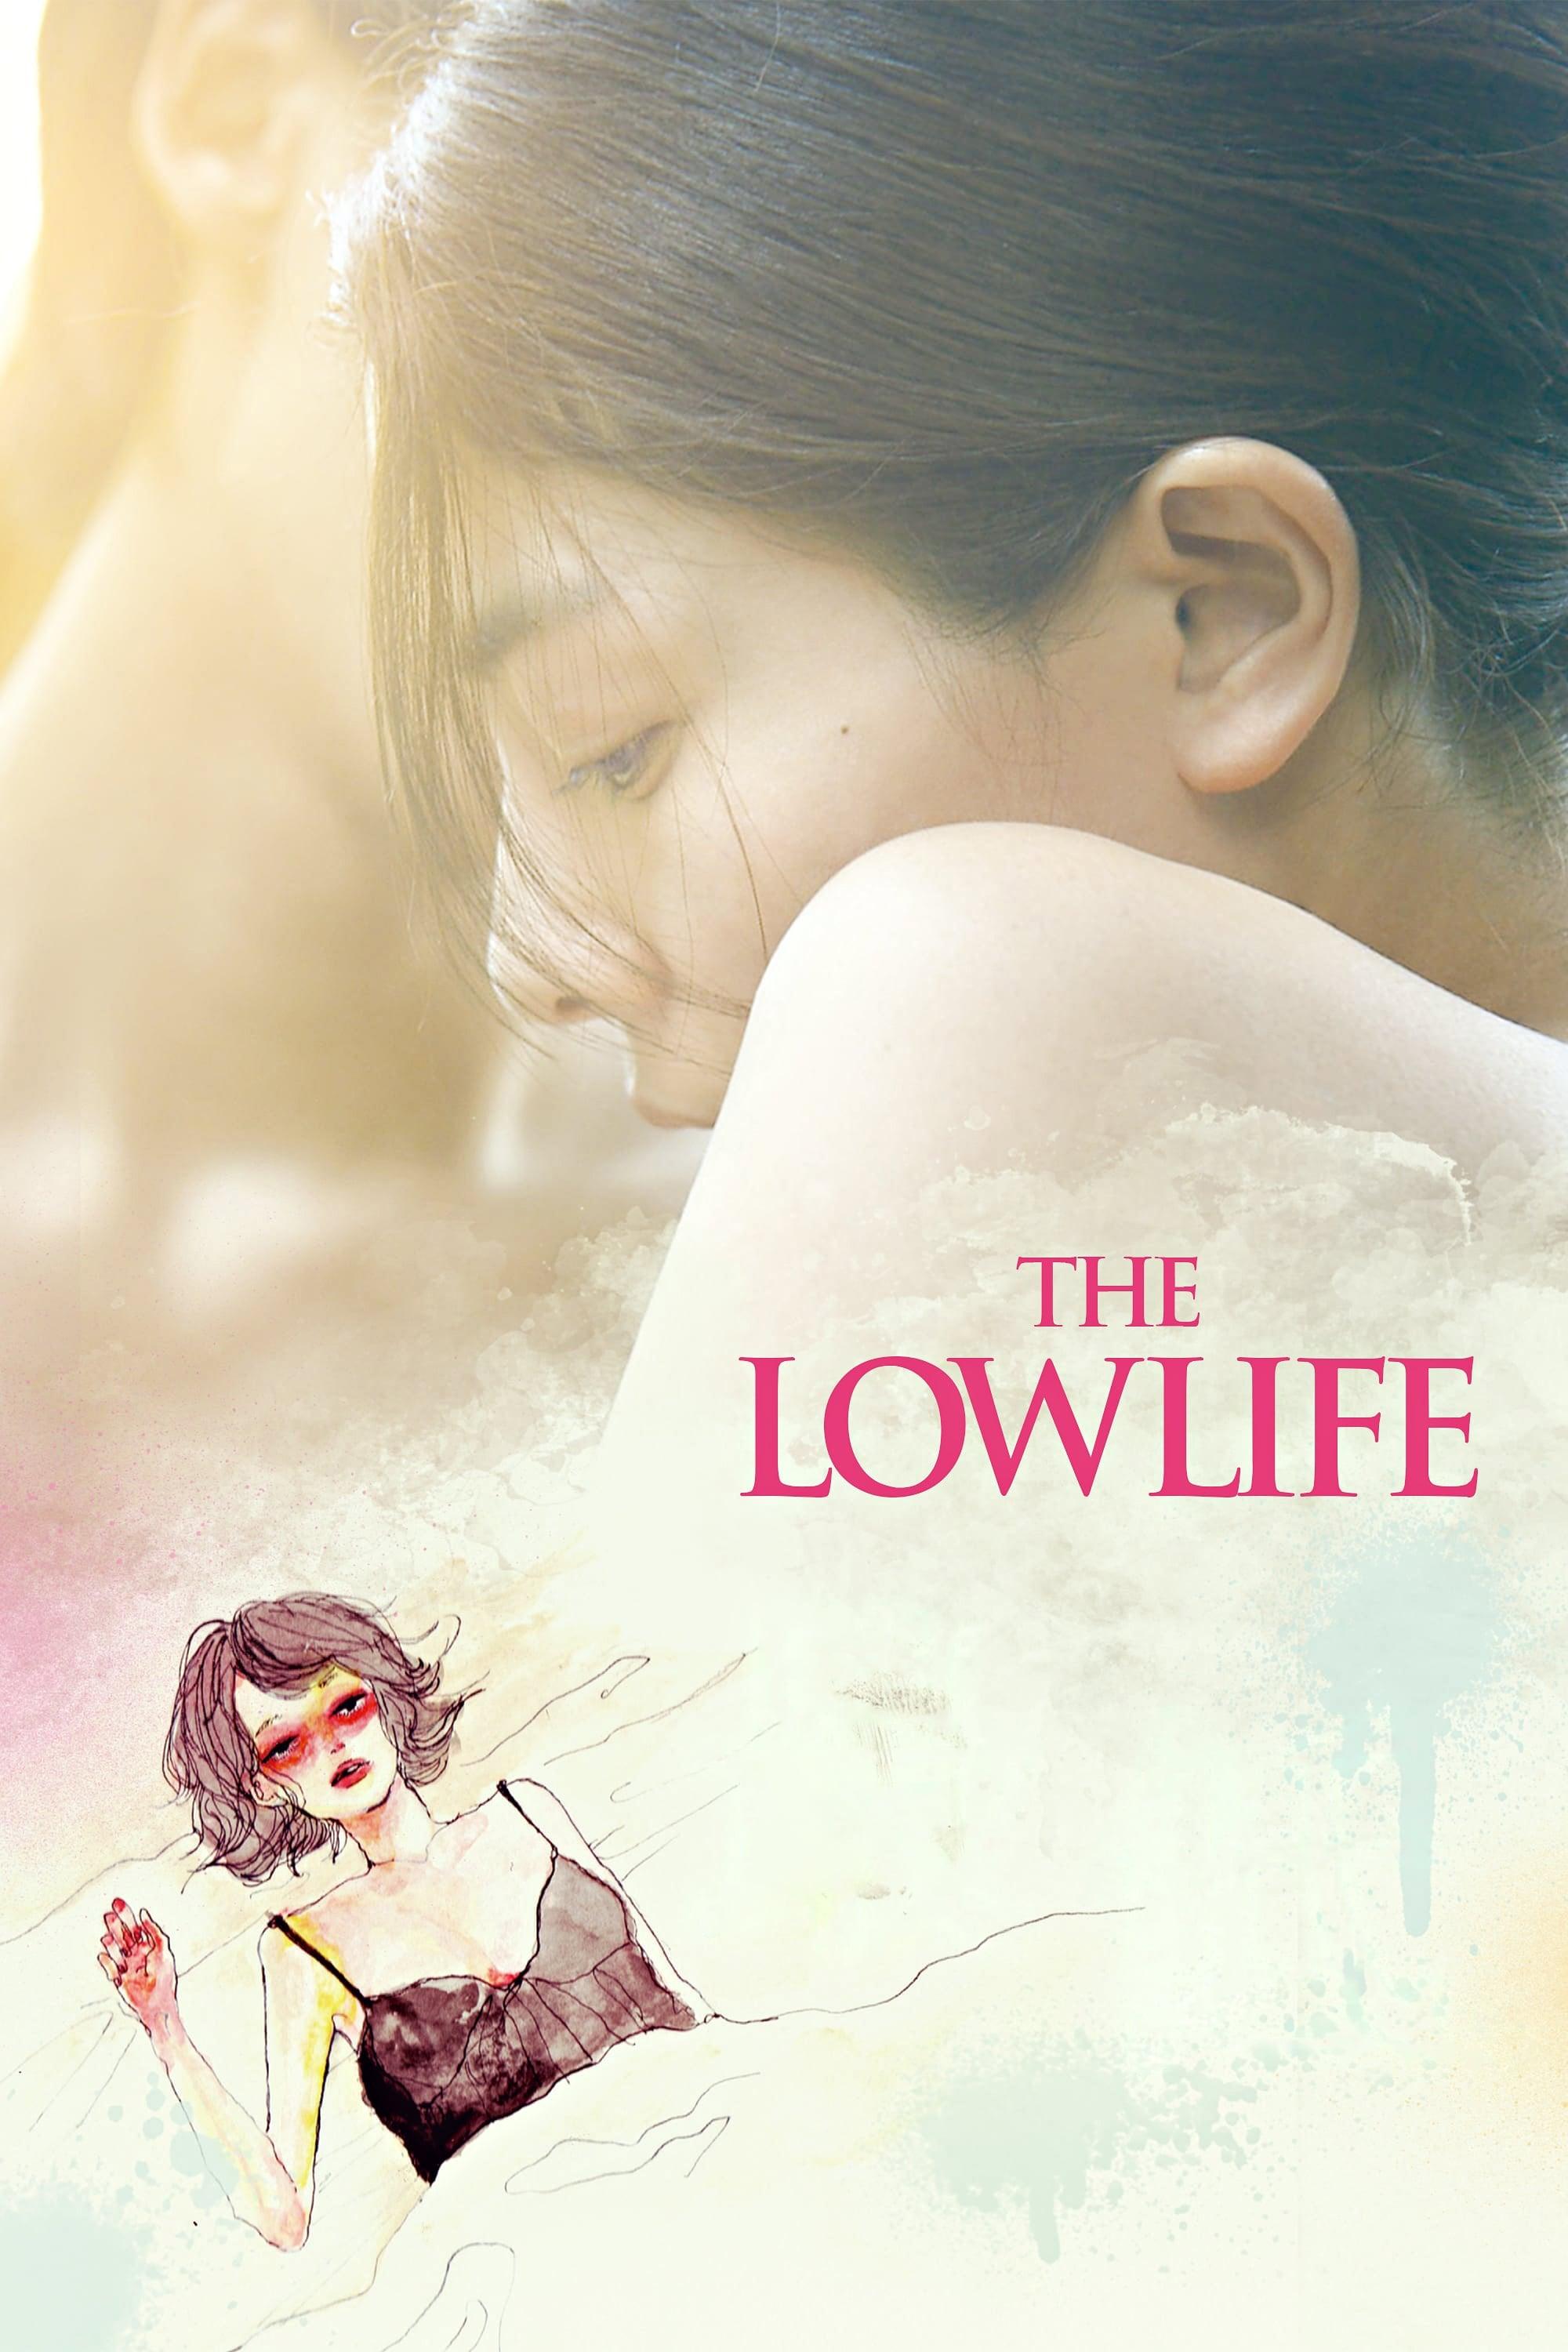 The Lowlife poster